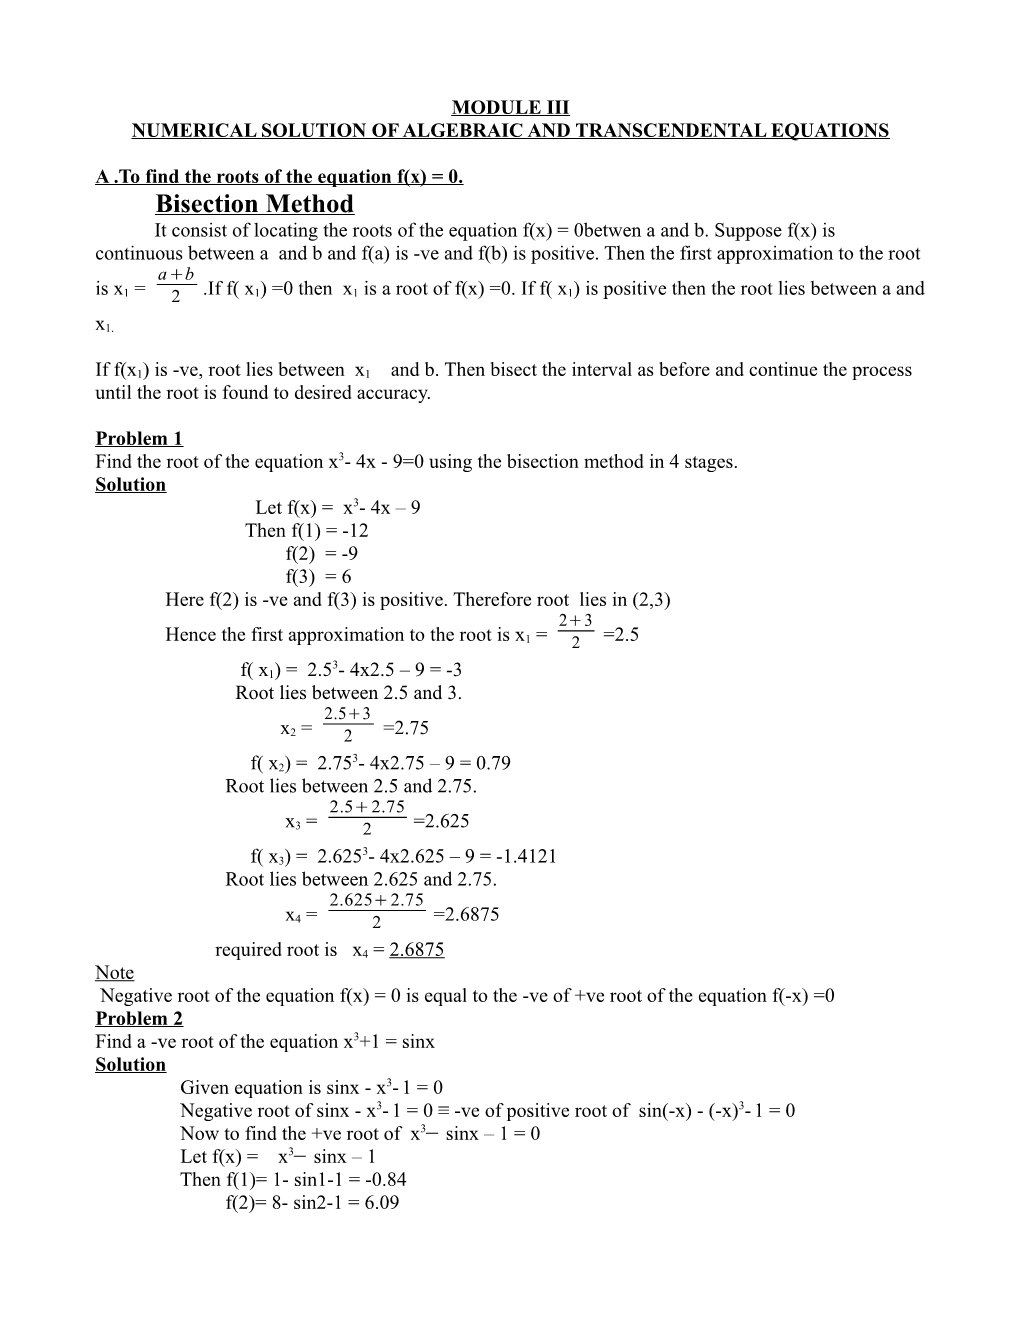 Numerical Solution of Algebraic and Transcendental Equations